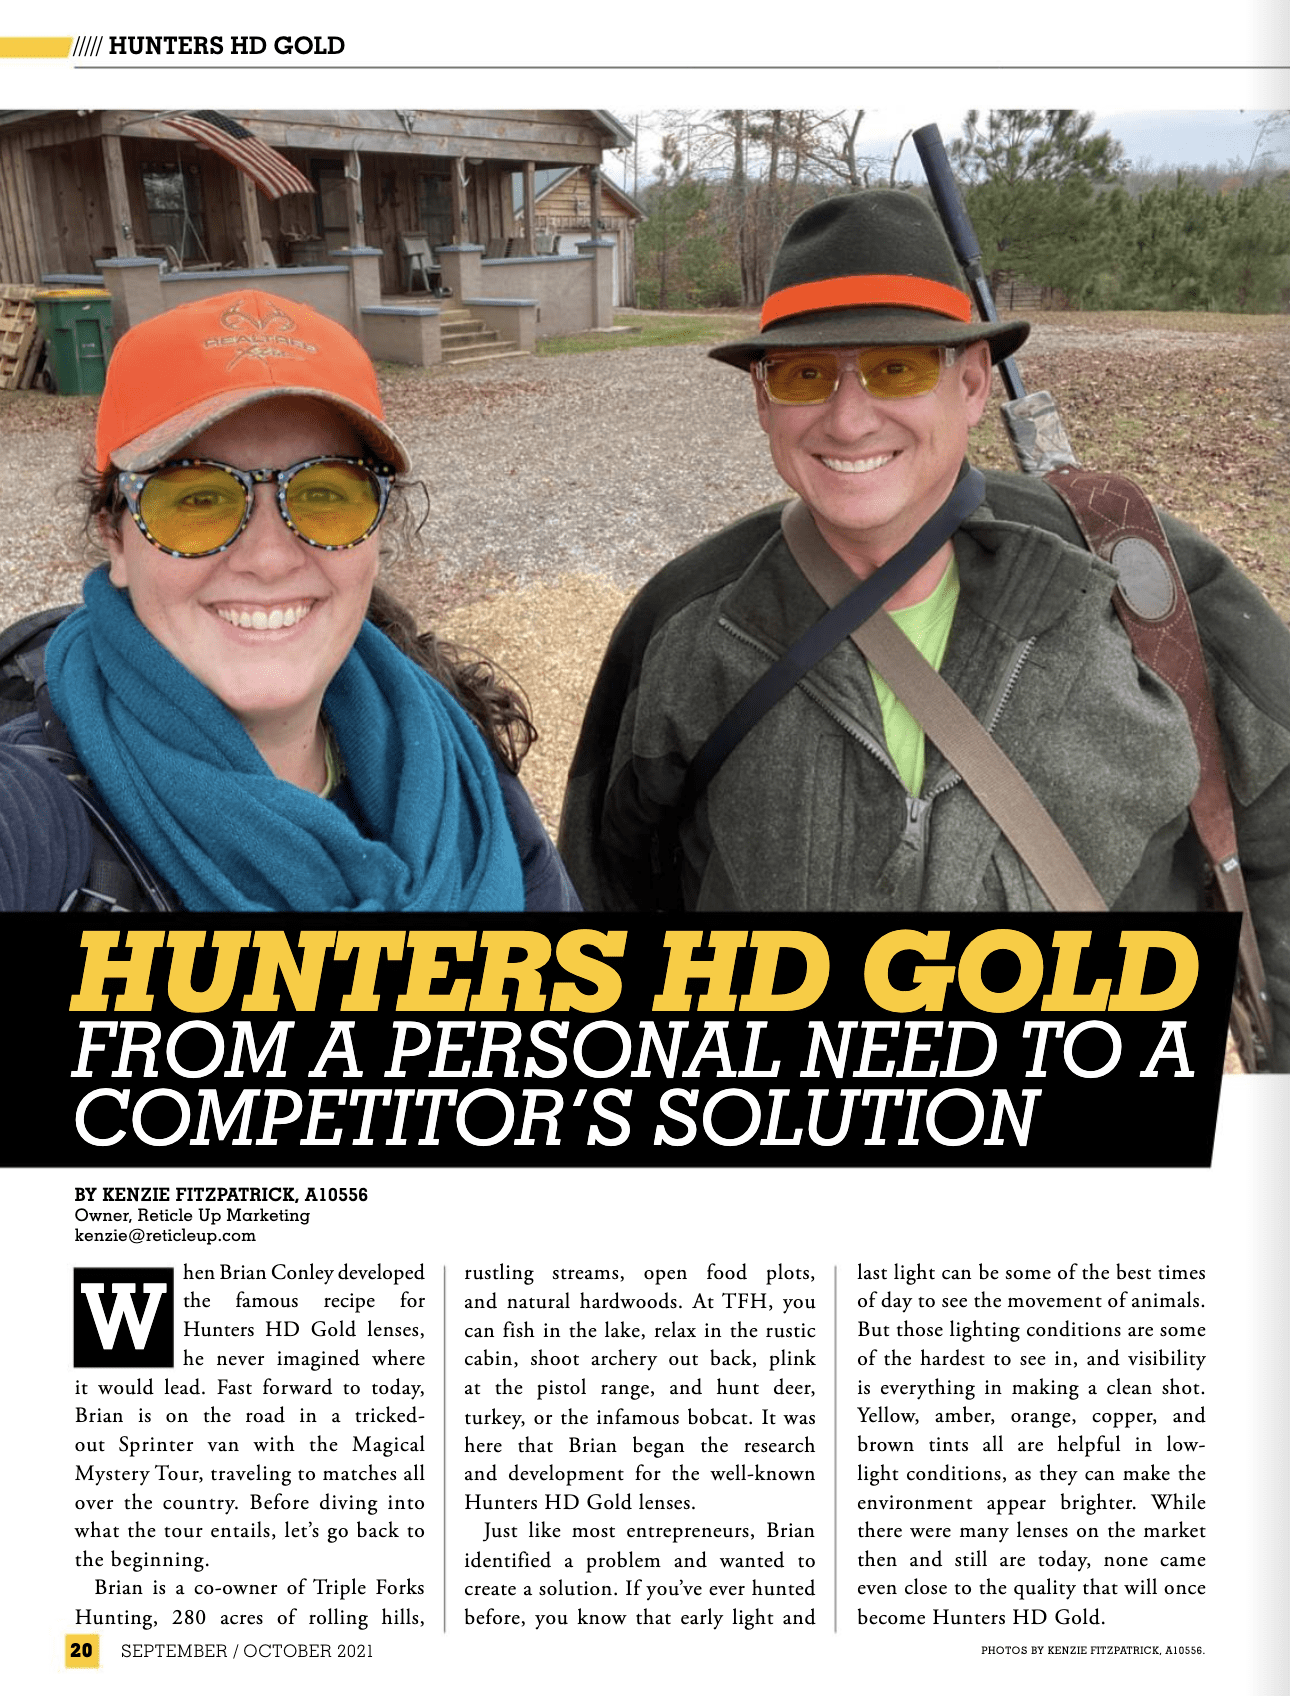 Hunters HD Gold From a Personal Need to a Competitor’s Solution